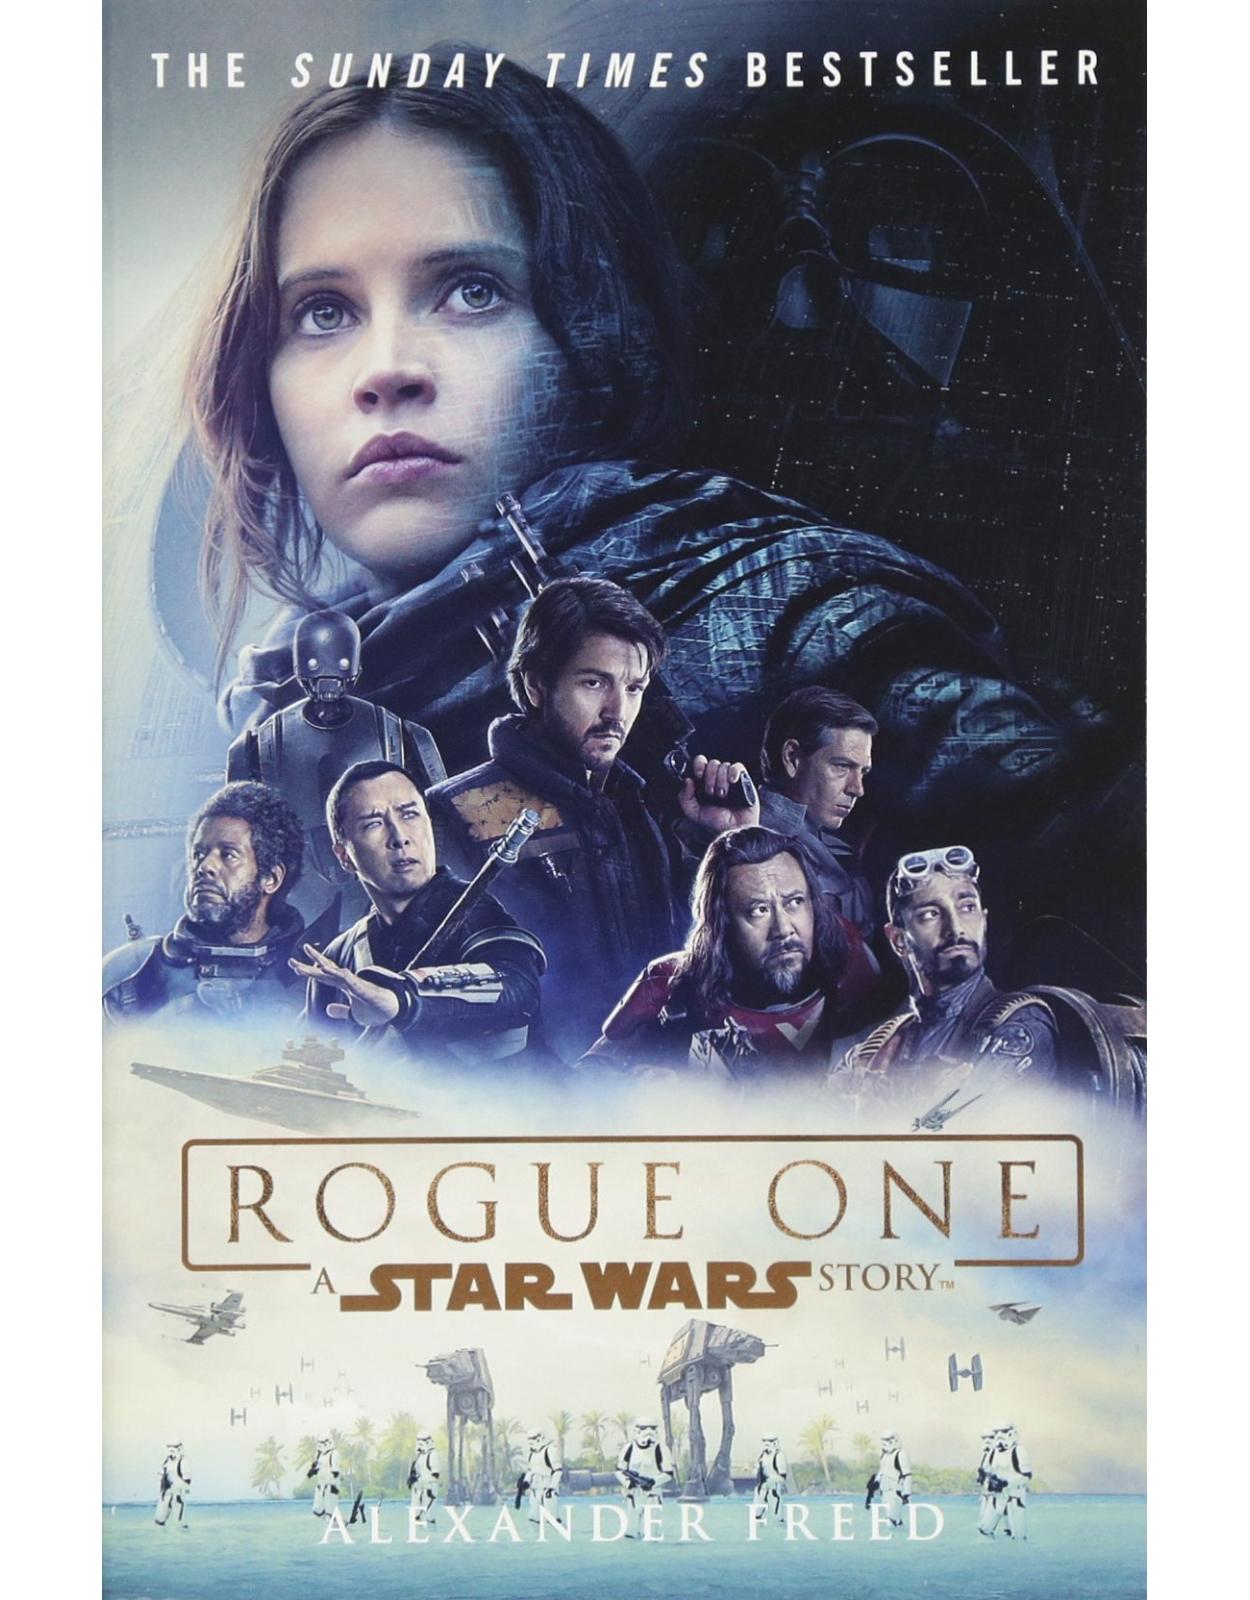 Rogue One: A Star Wars Story (Star Wars Rogue One)